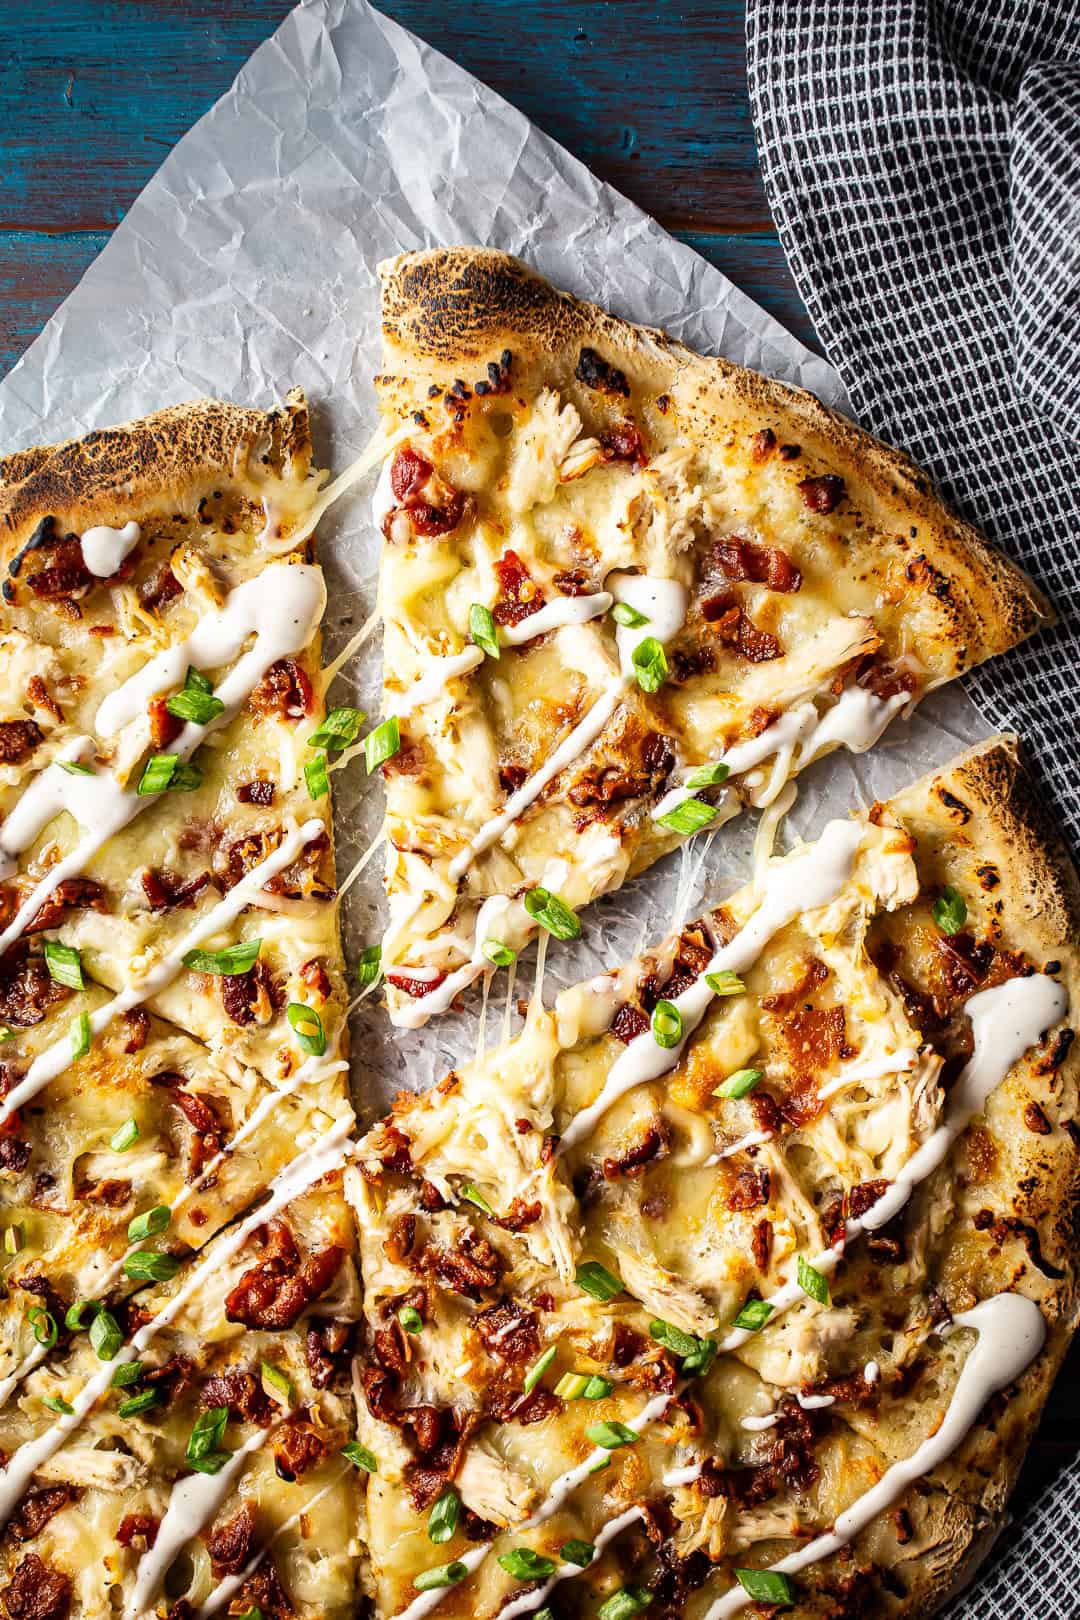 Bacon chicken ranch pizza baked and topped with a drizzle of creamy ranch dressing.